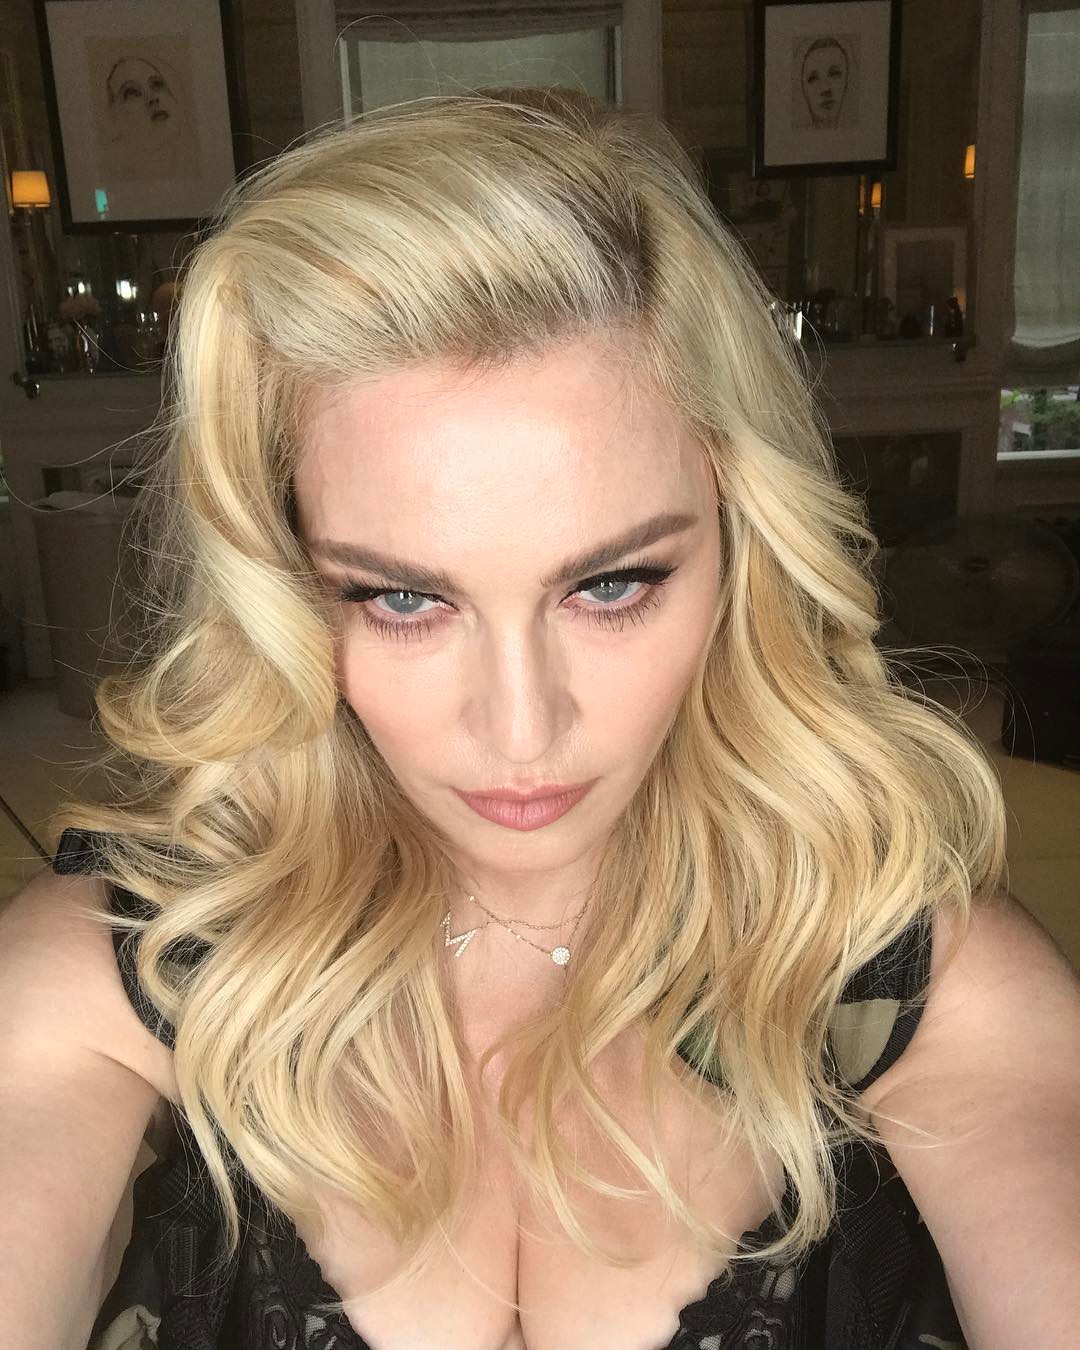 The one and only Madonna previews her beauty look for the Met Gala.